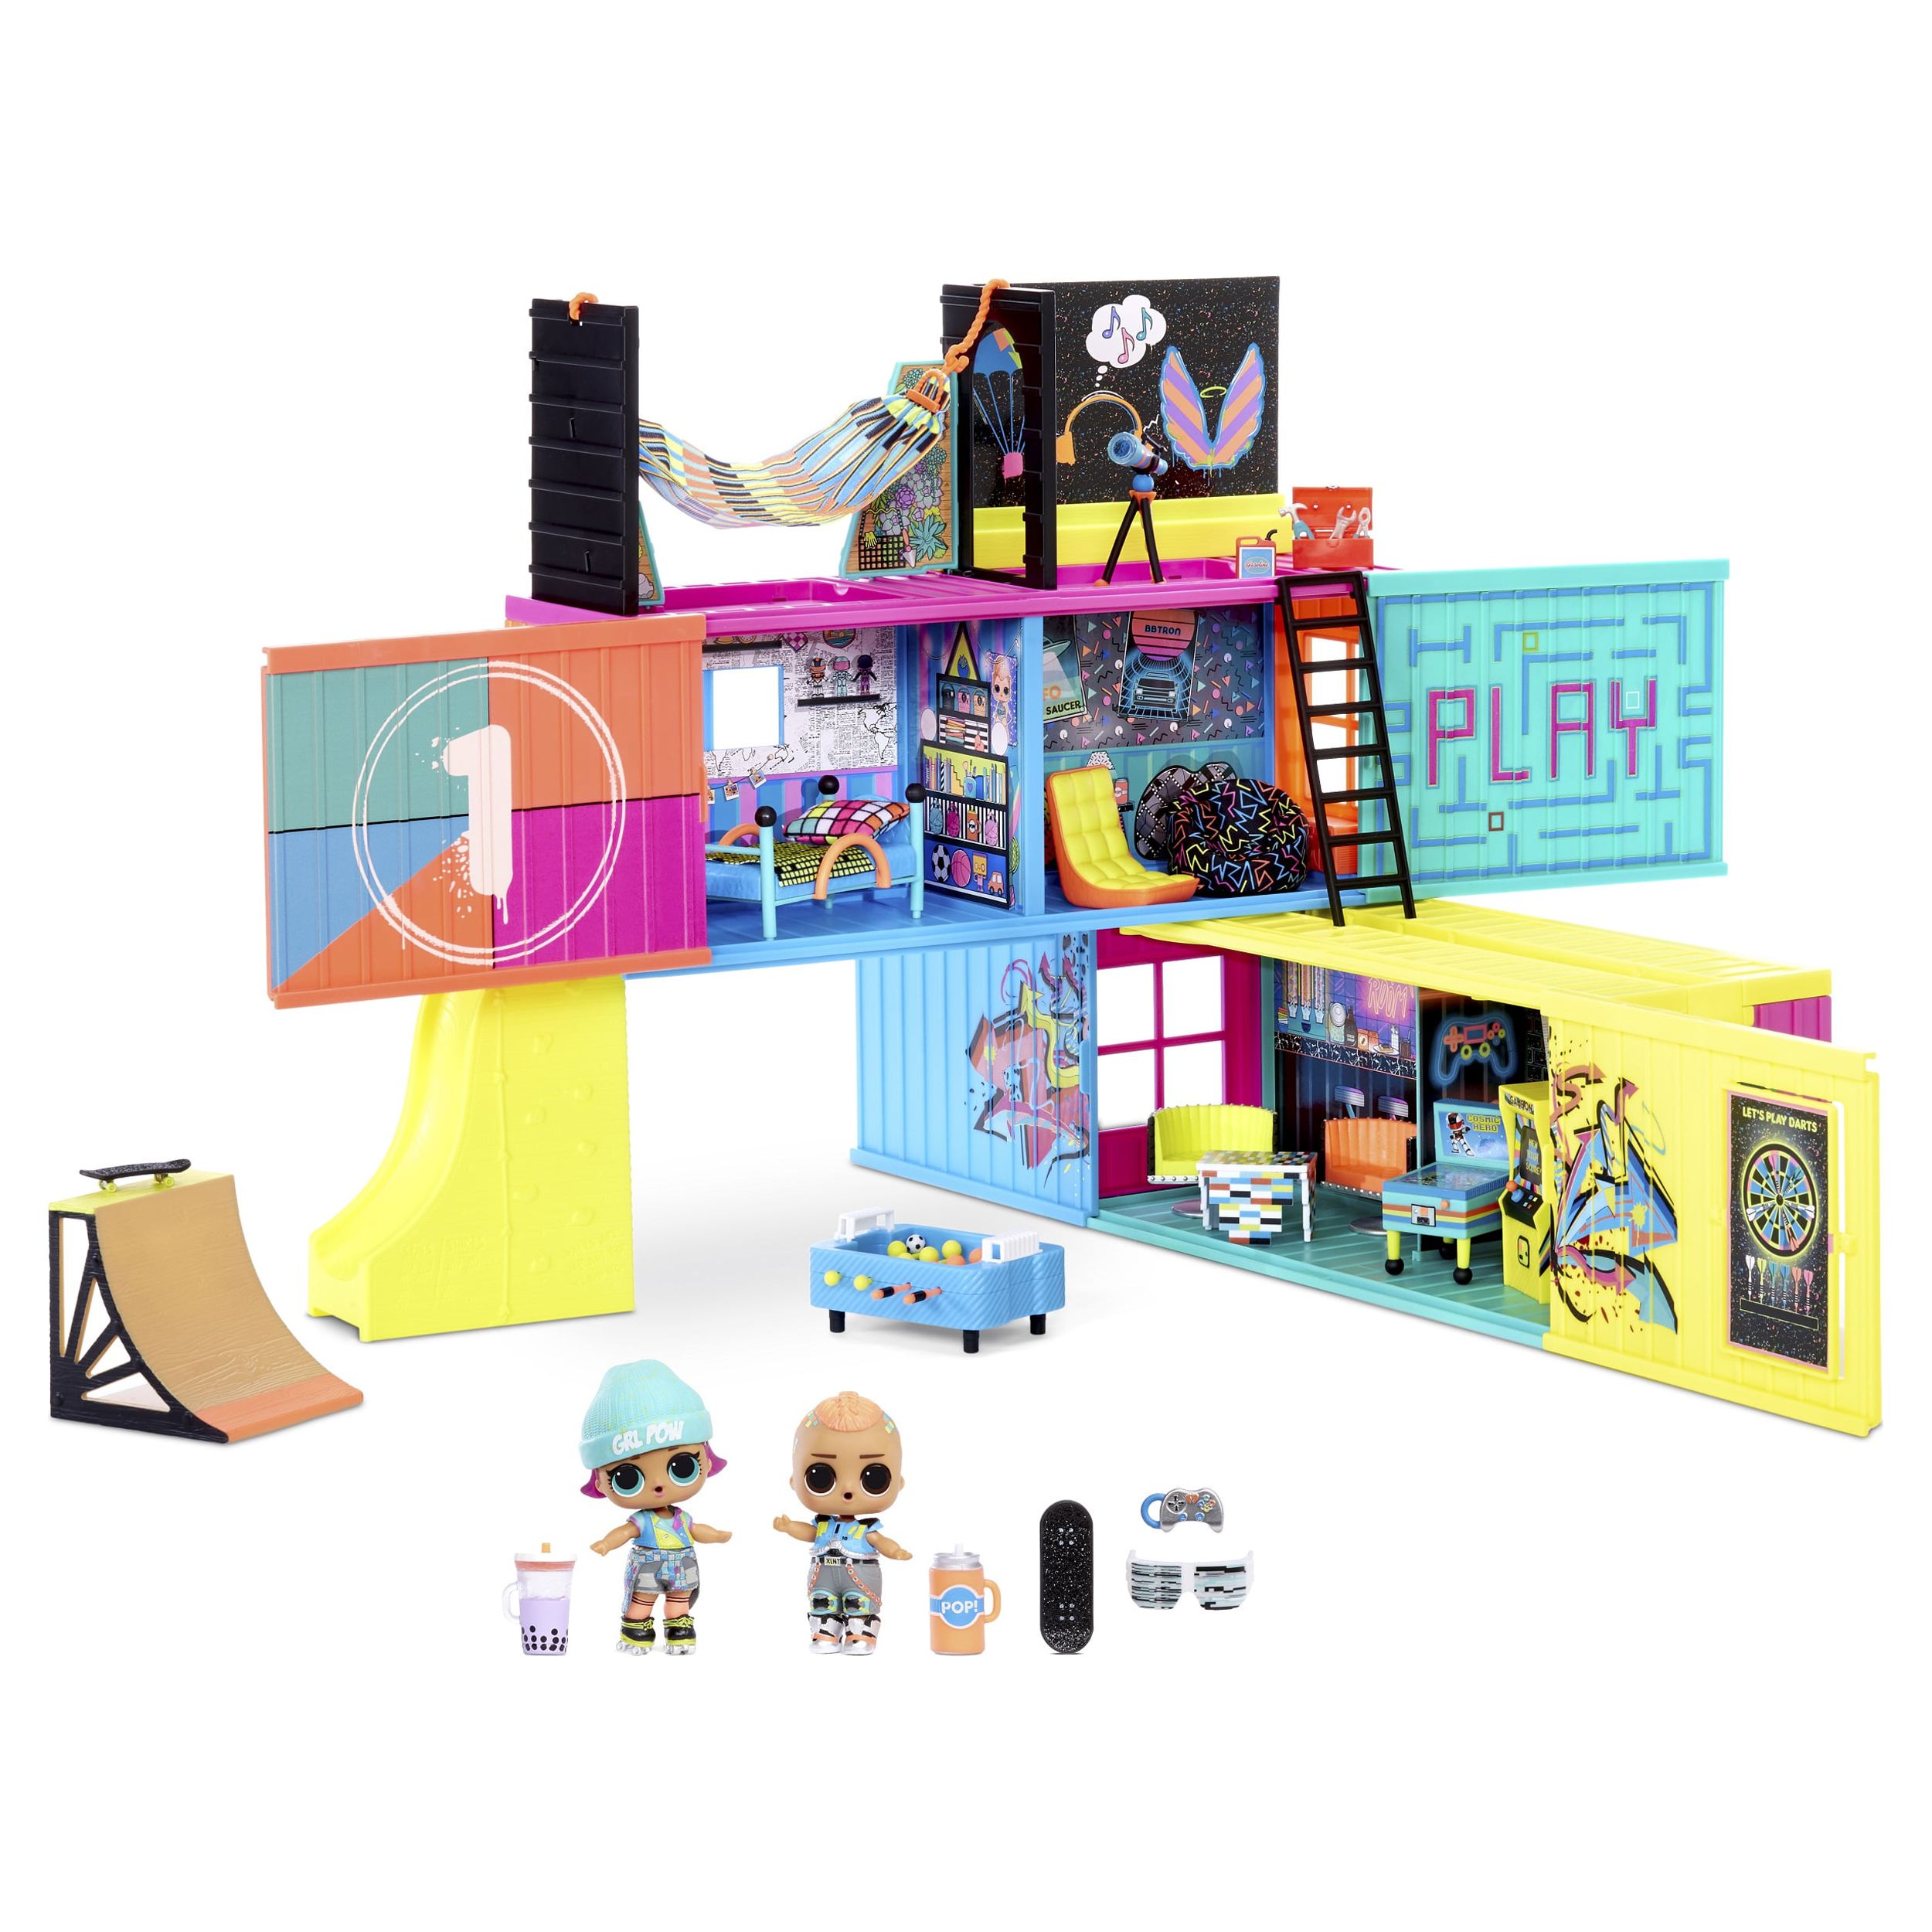 LOL Surprise Clubhouse Playset With 40+ Surprises and 2 Exclusives Dolls, Great Gift for Kids Ages 4 5 6+ - image 1 of 11